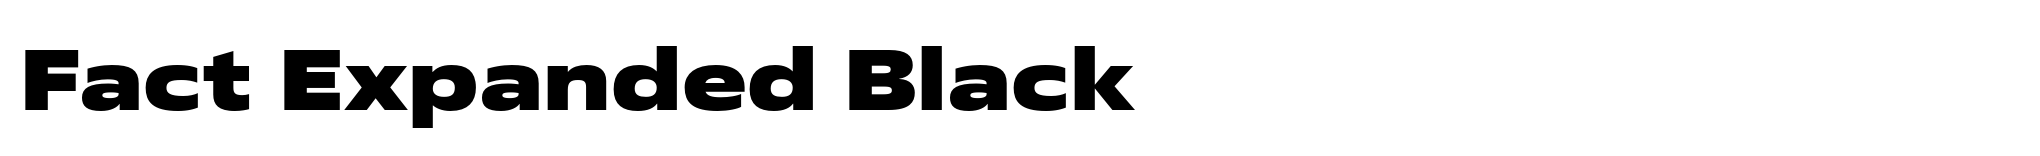 Fact Expanded Black image